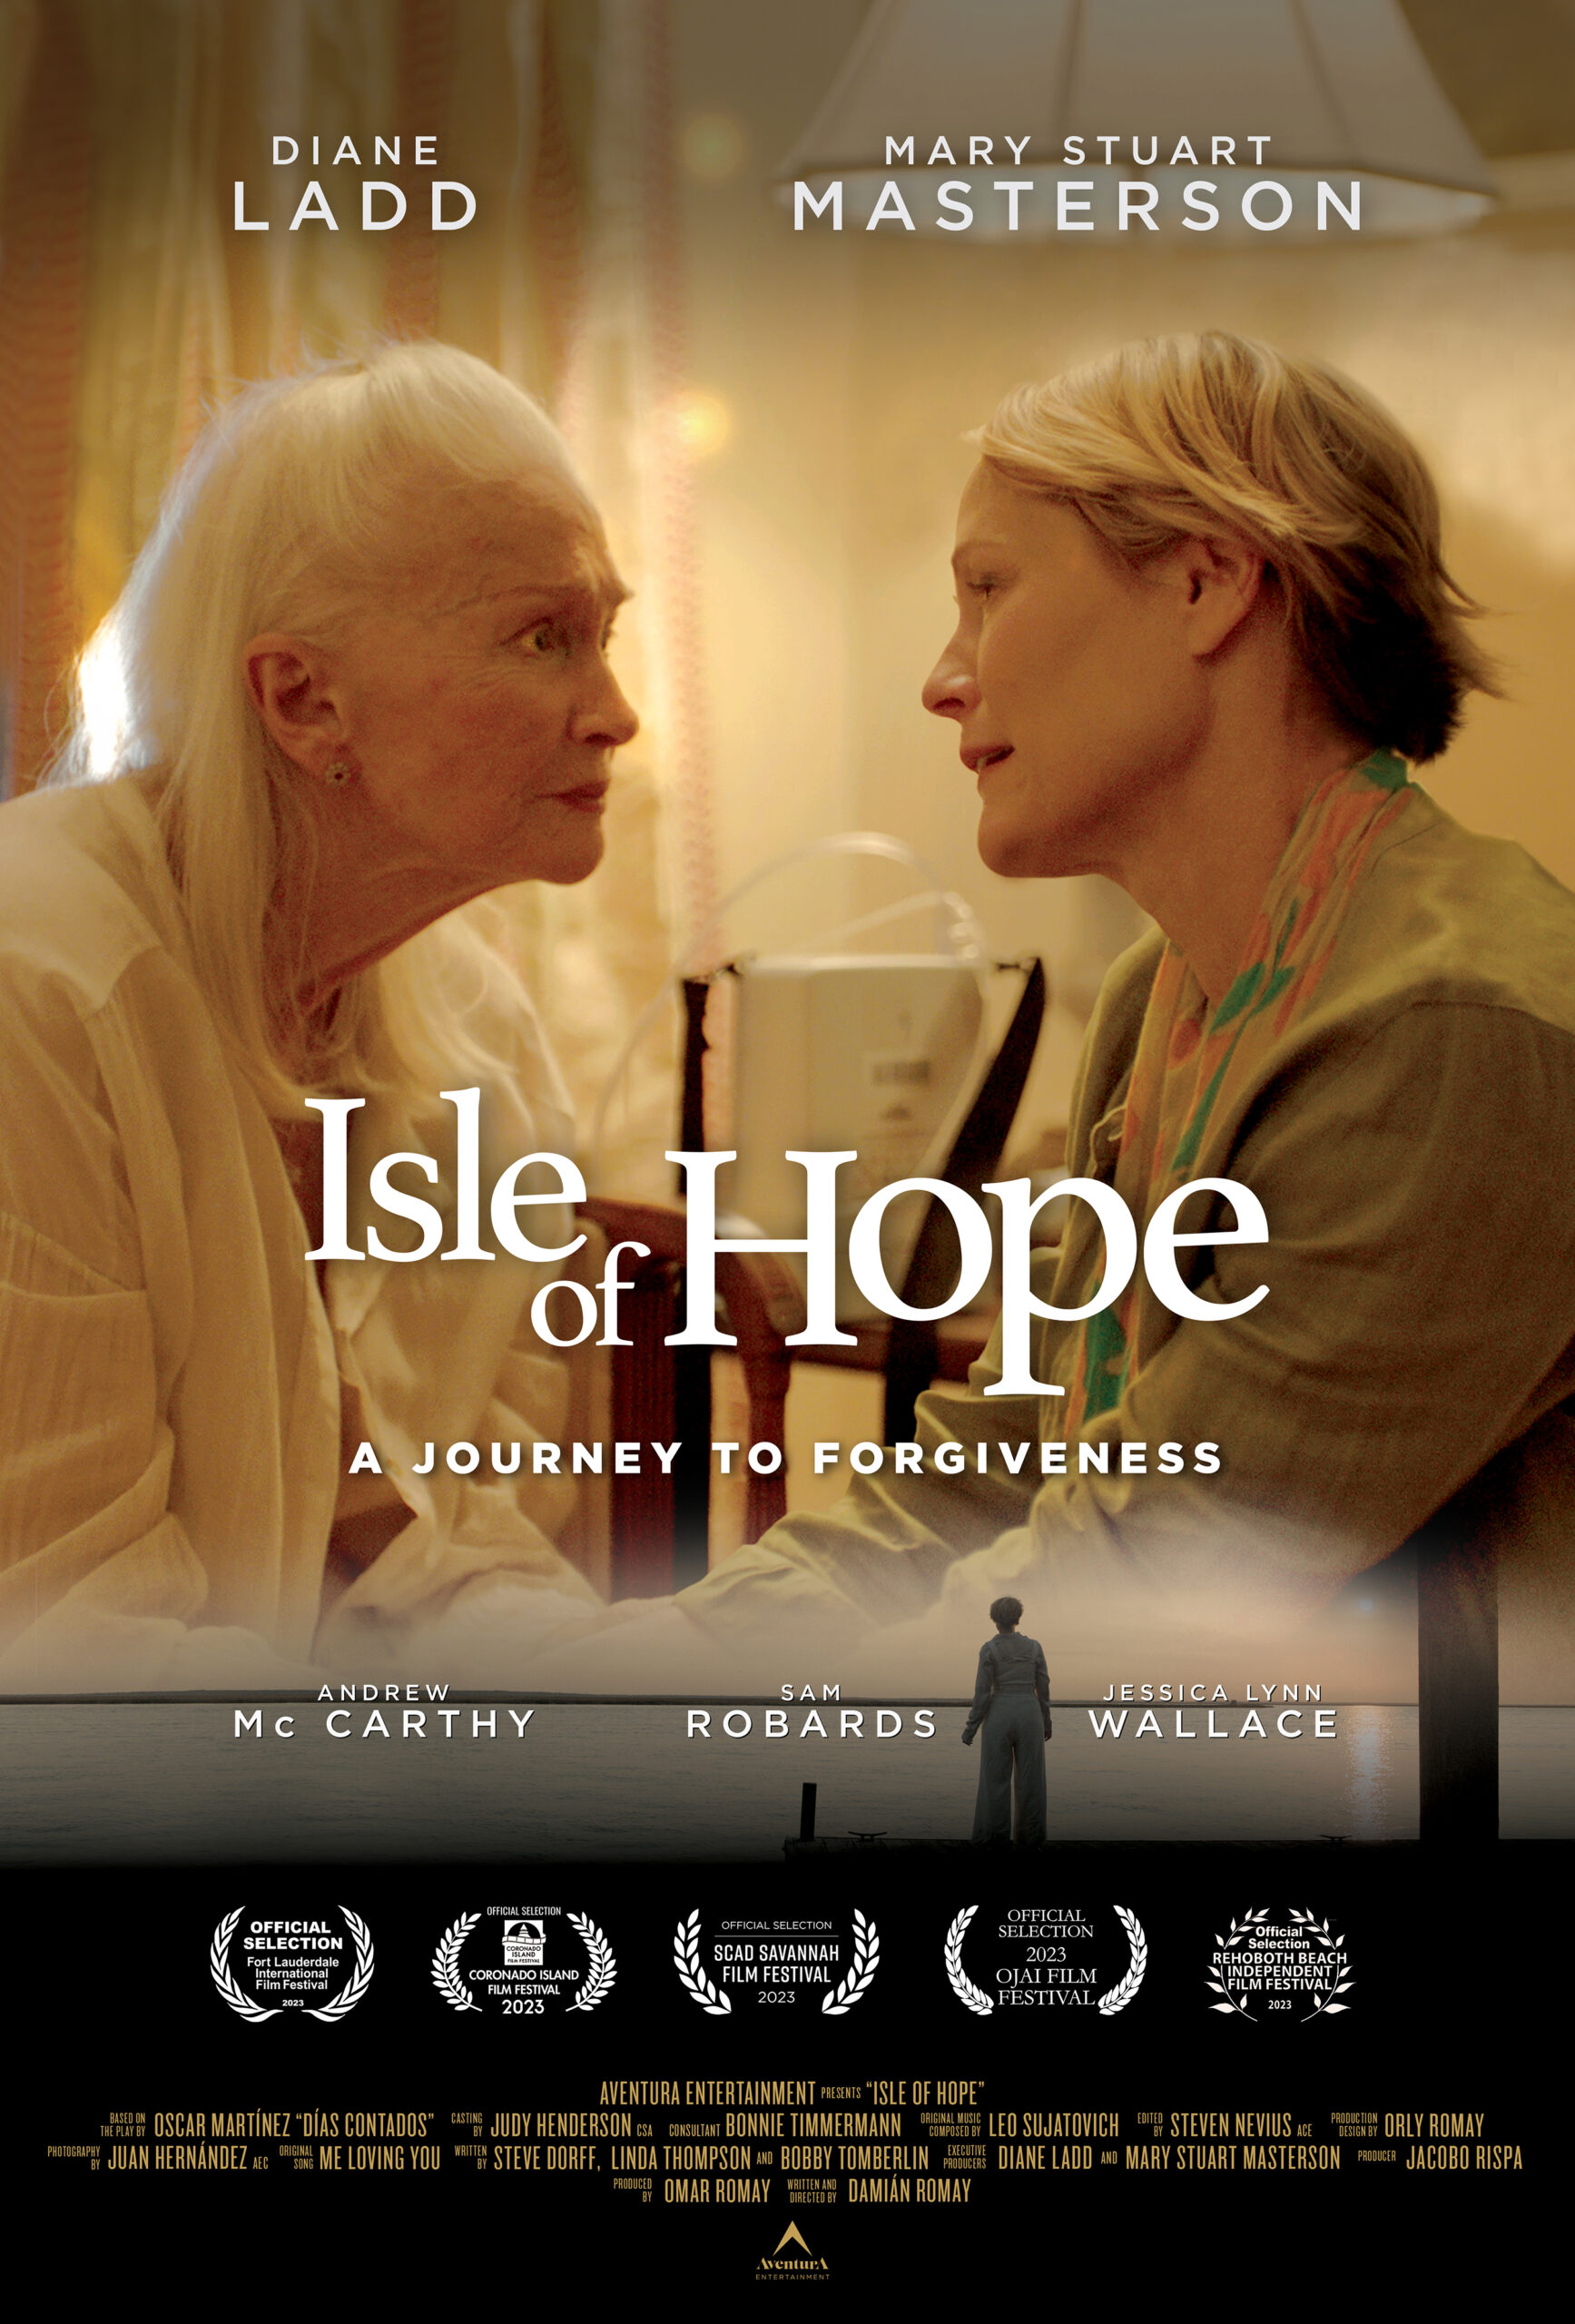 Film Review: “Isle of Hope”